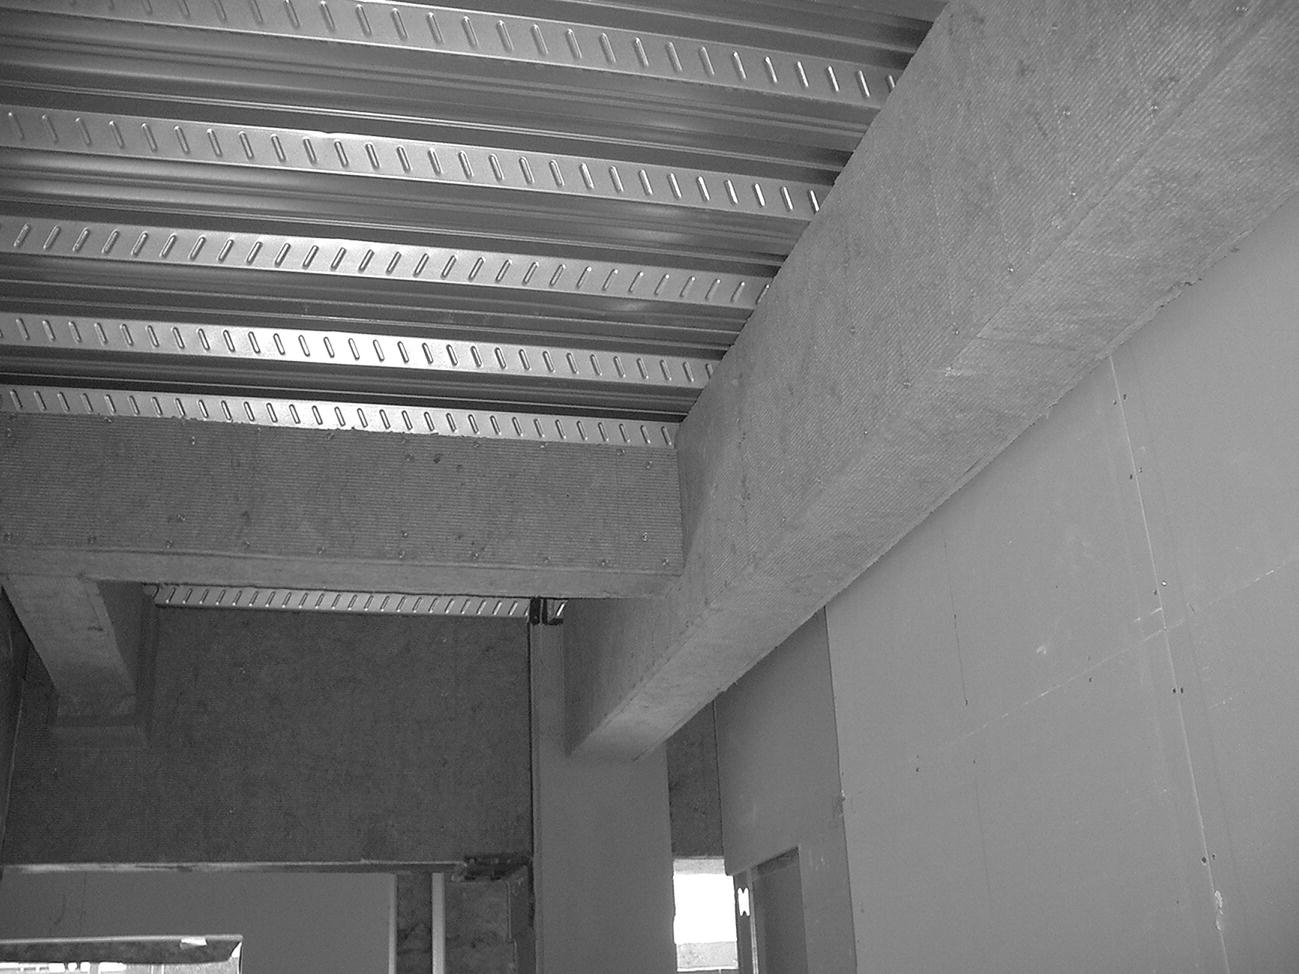 Photo displaying mineral fibreboard fire protection screwed to light steel framing around the steel sections.